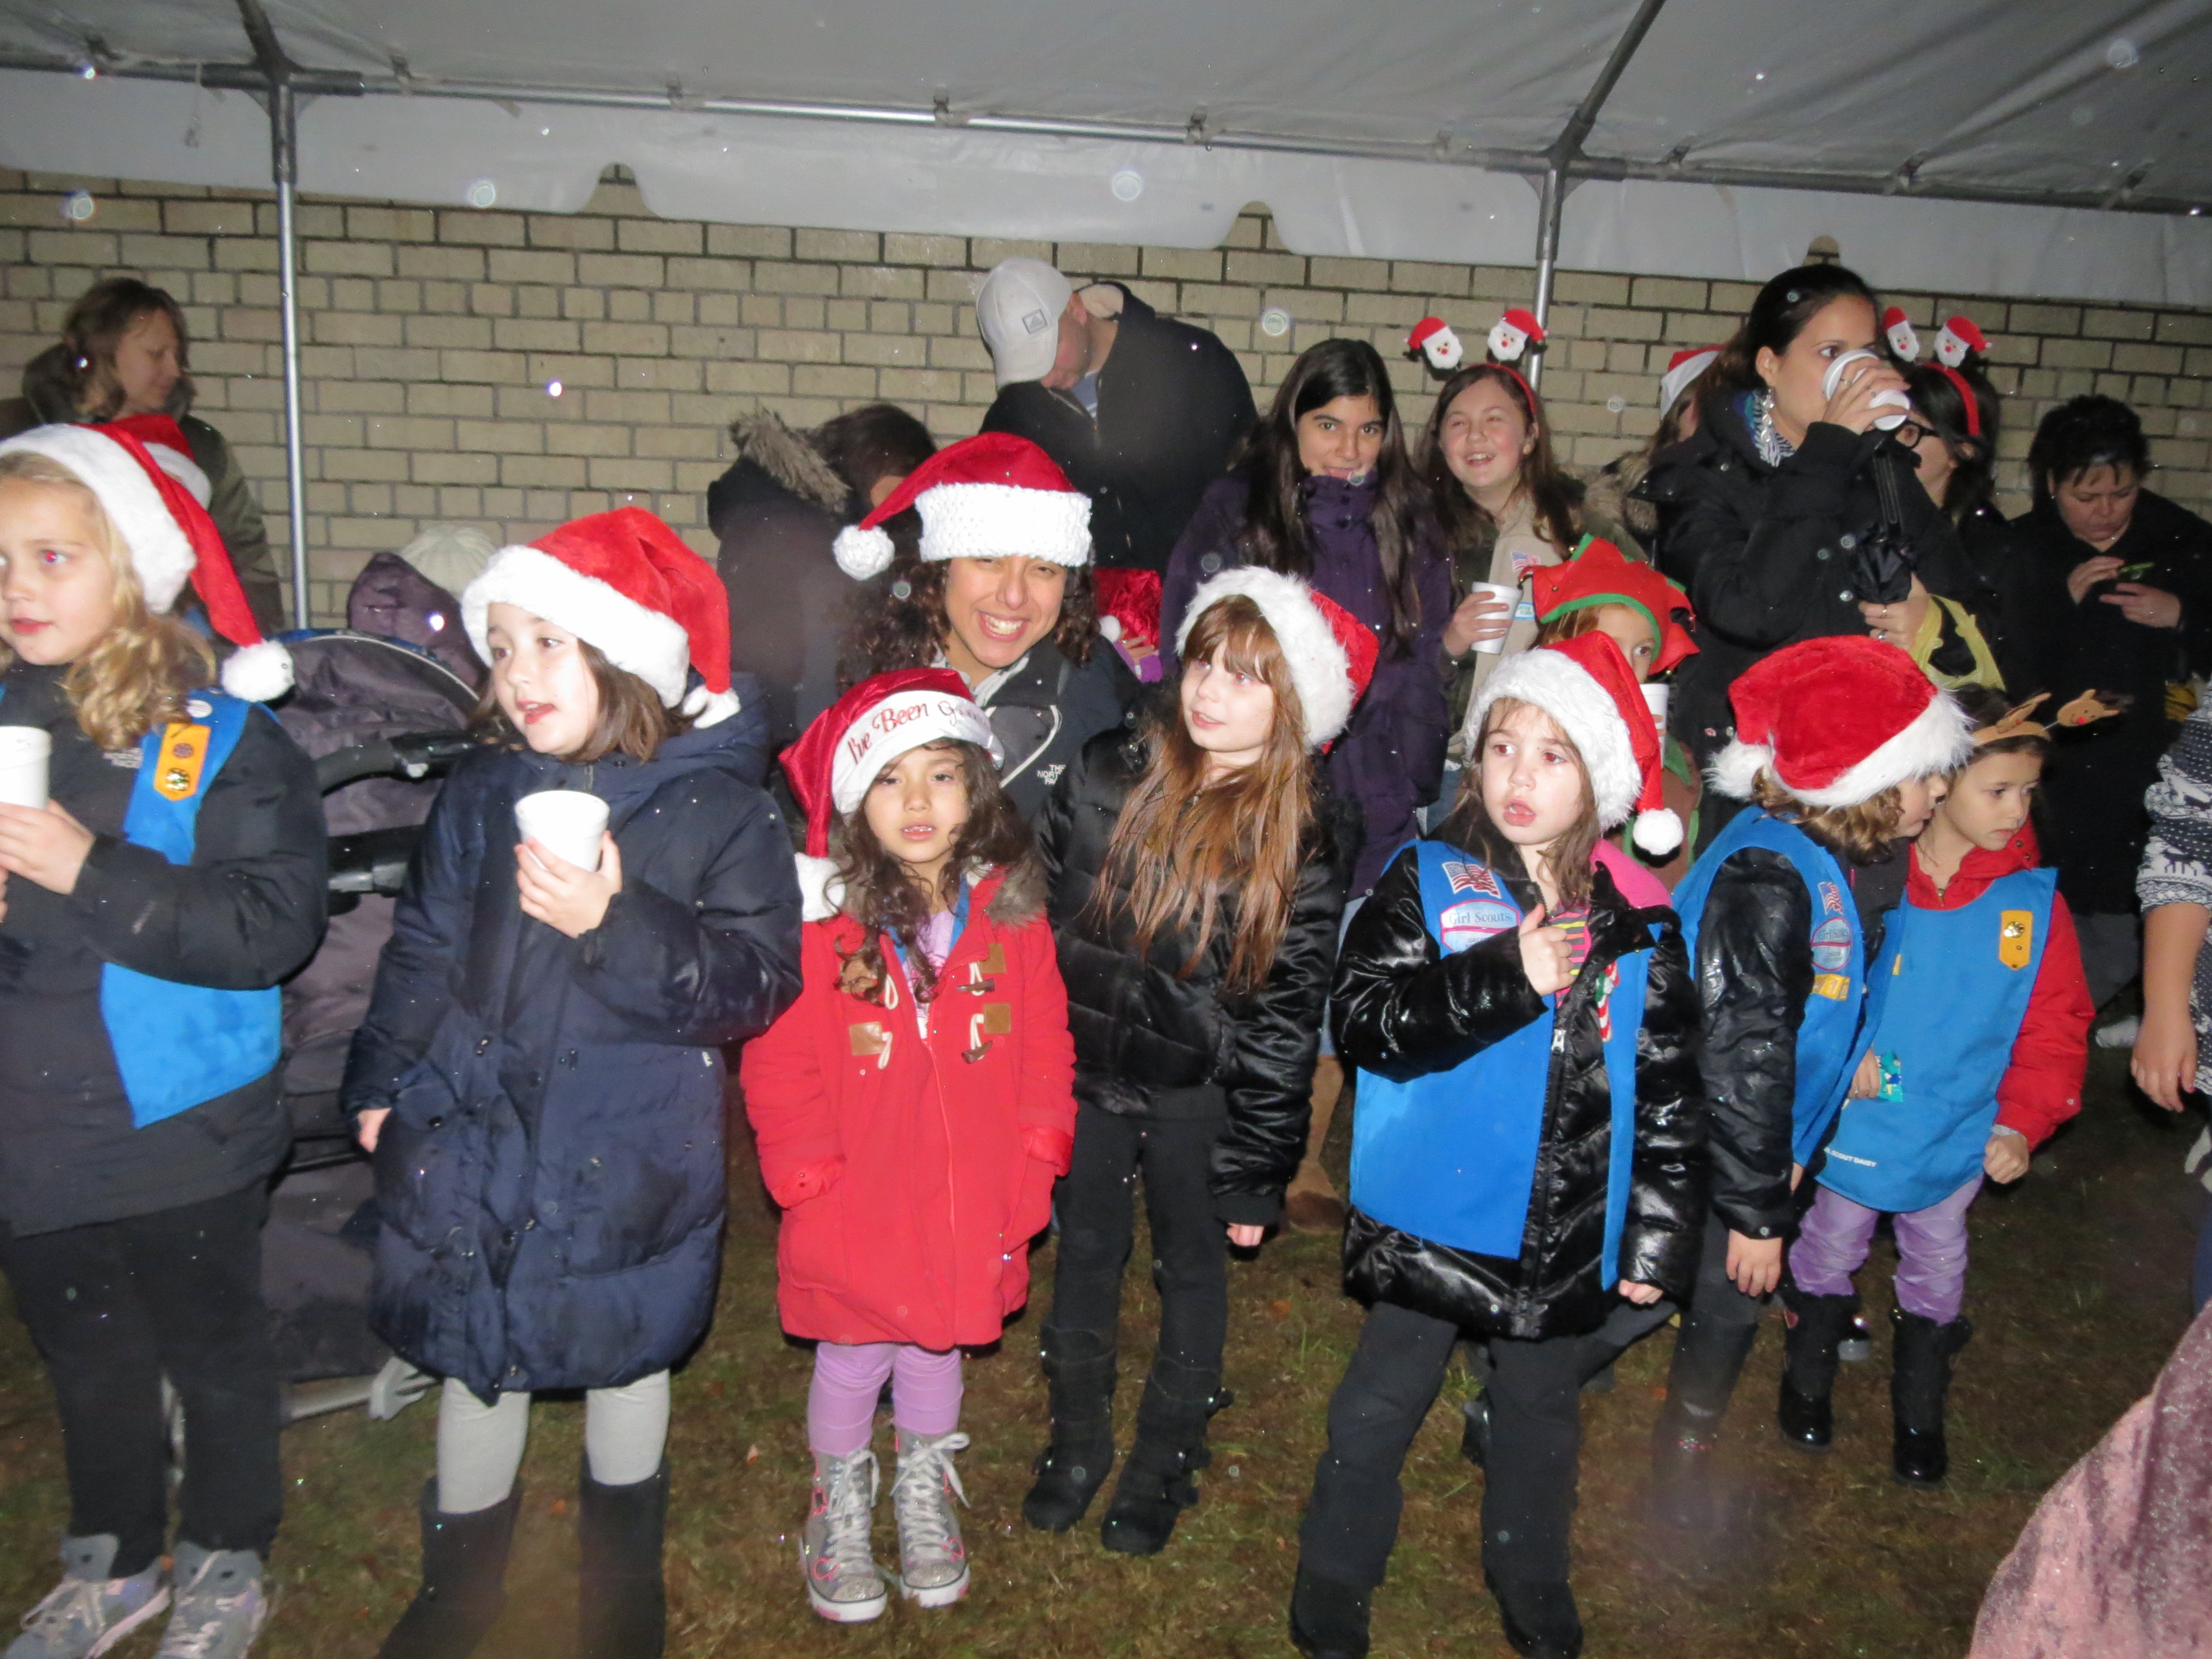 Santa spends time handing out goodies and cheer to youngsters thrilled to catch a glimpse of the North Pole resident.